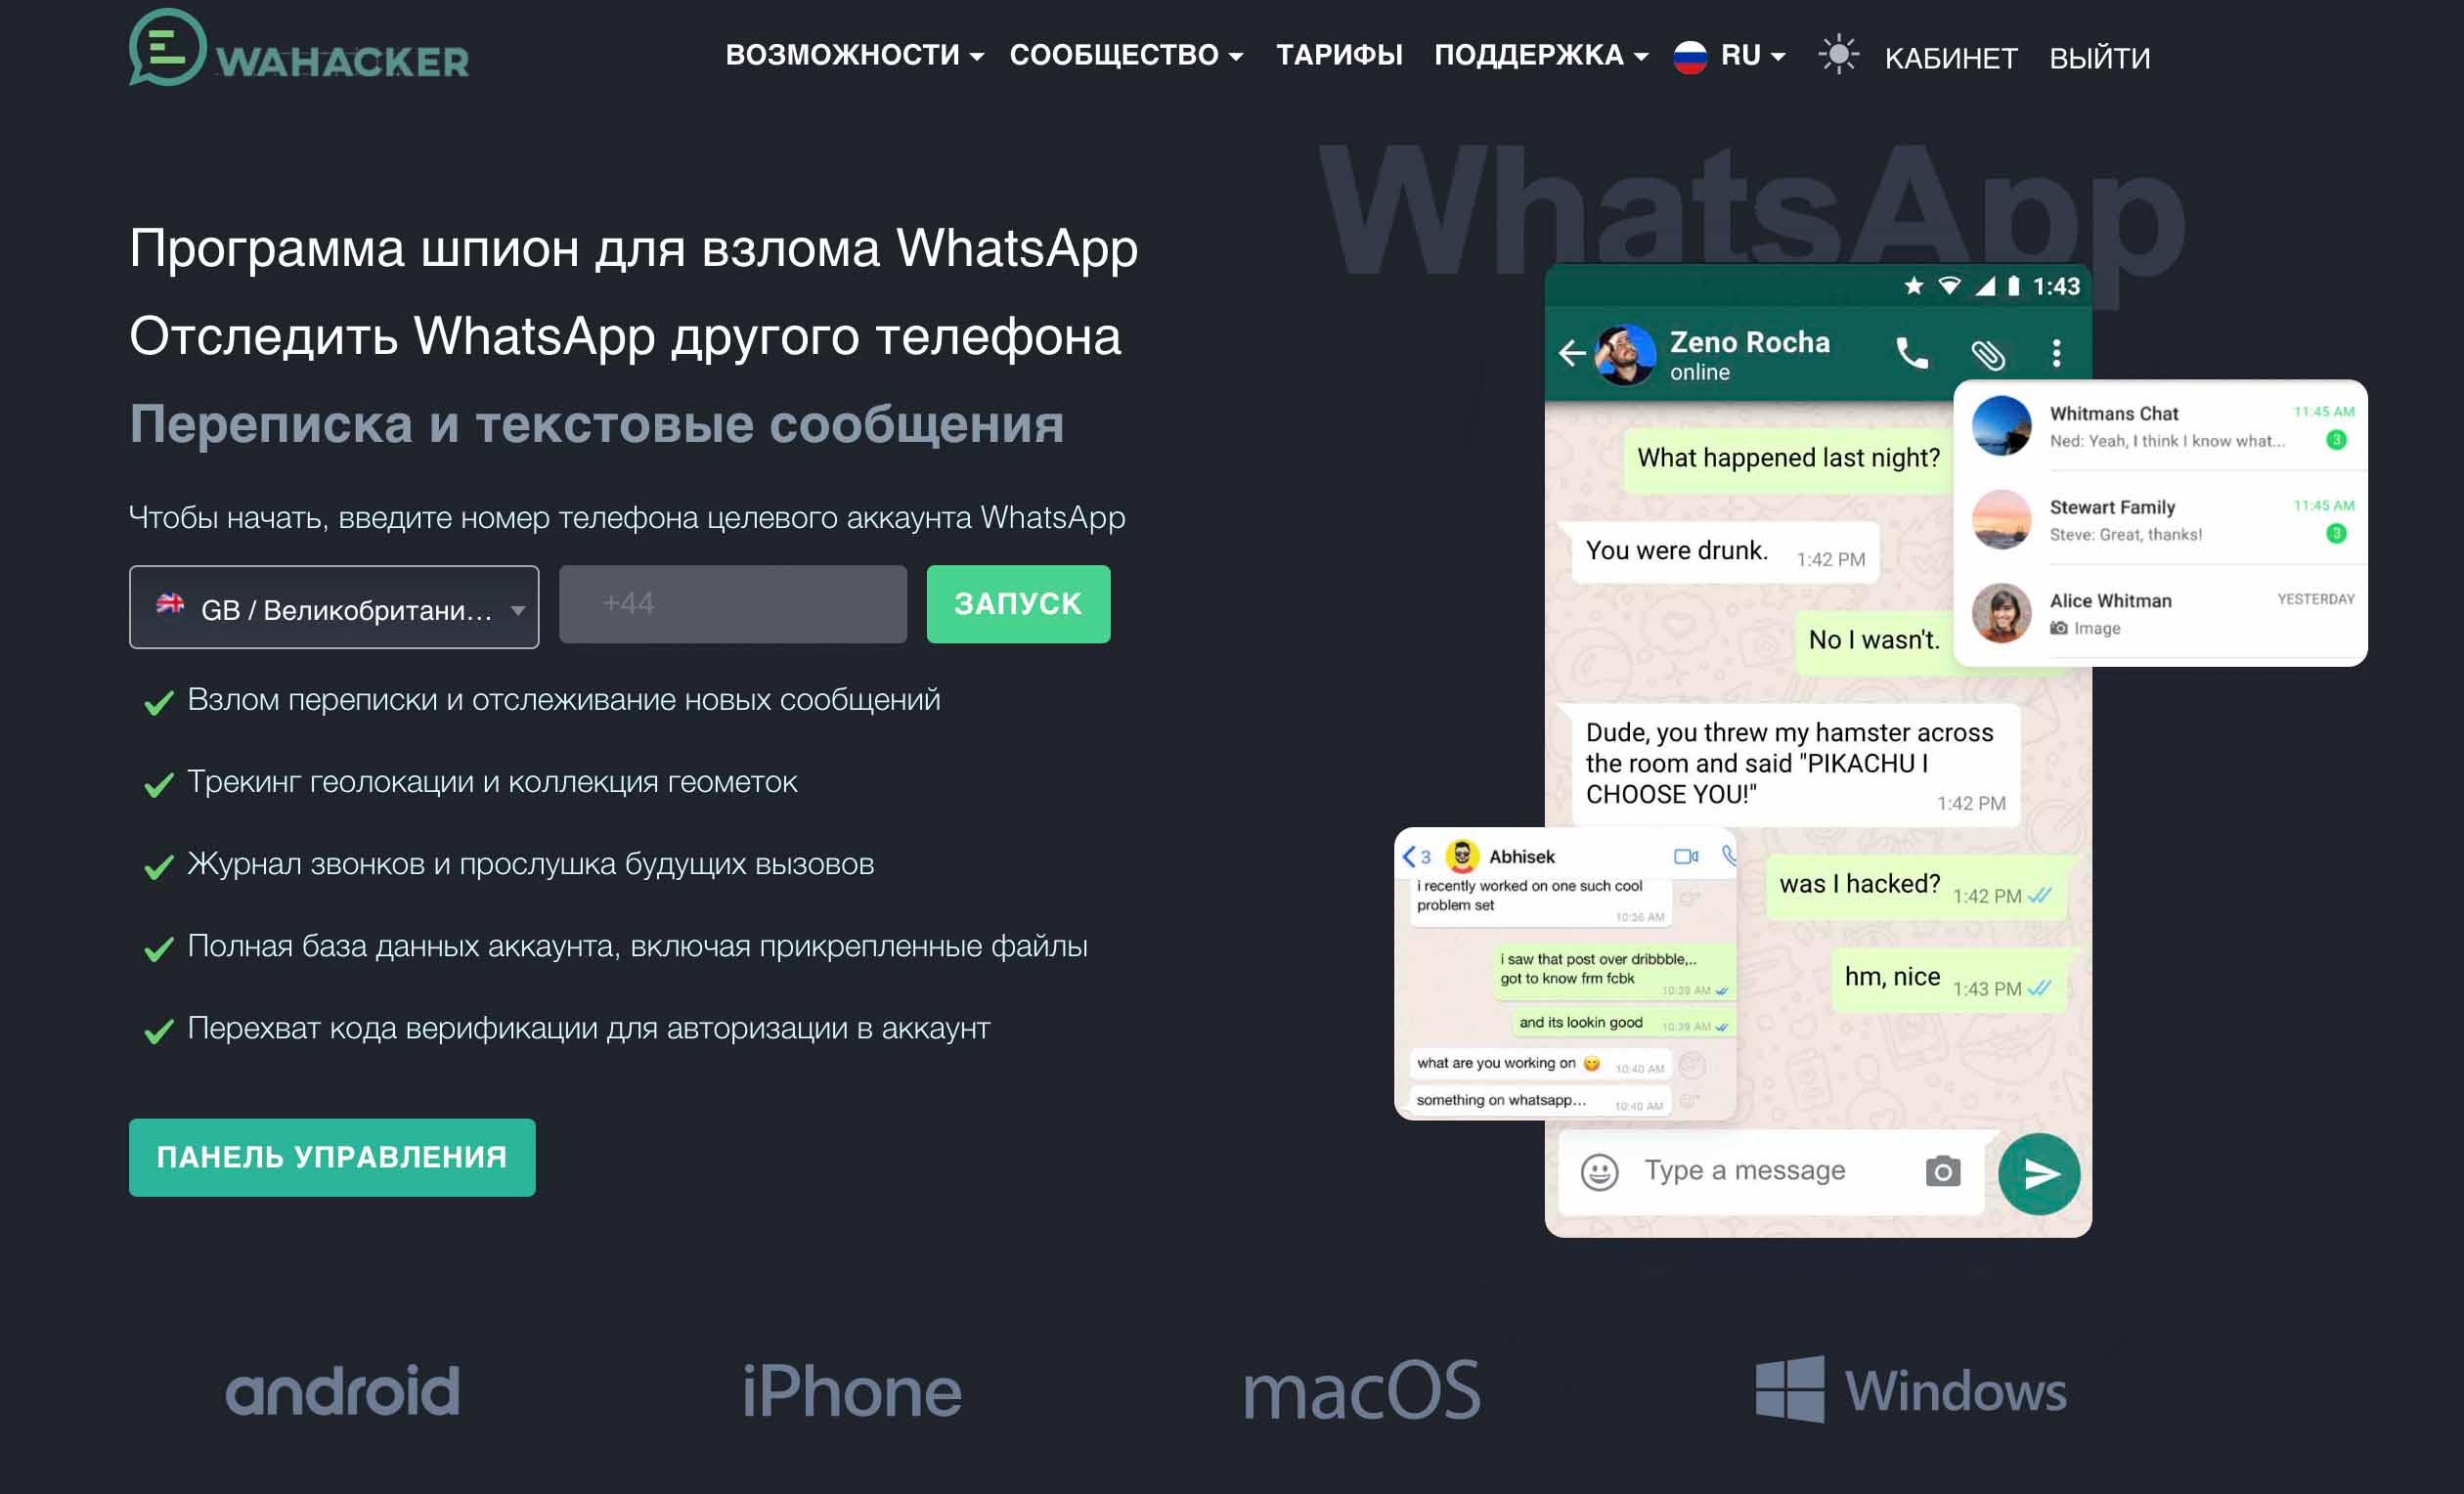 Launch WaHacker to read other people's messages in WhatsApp!